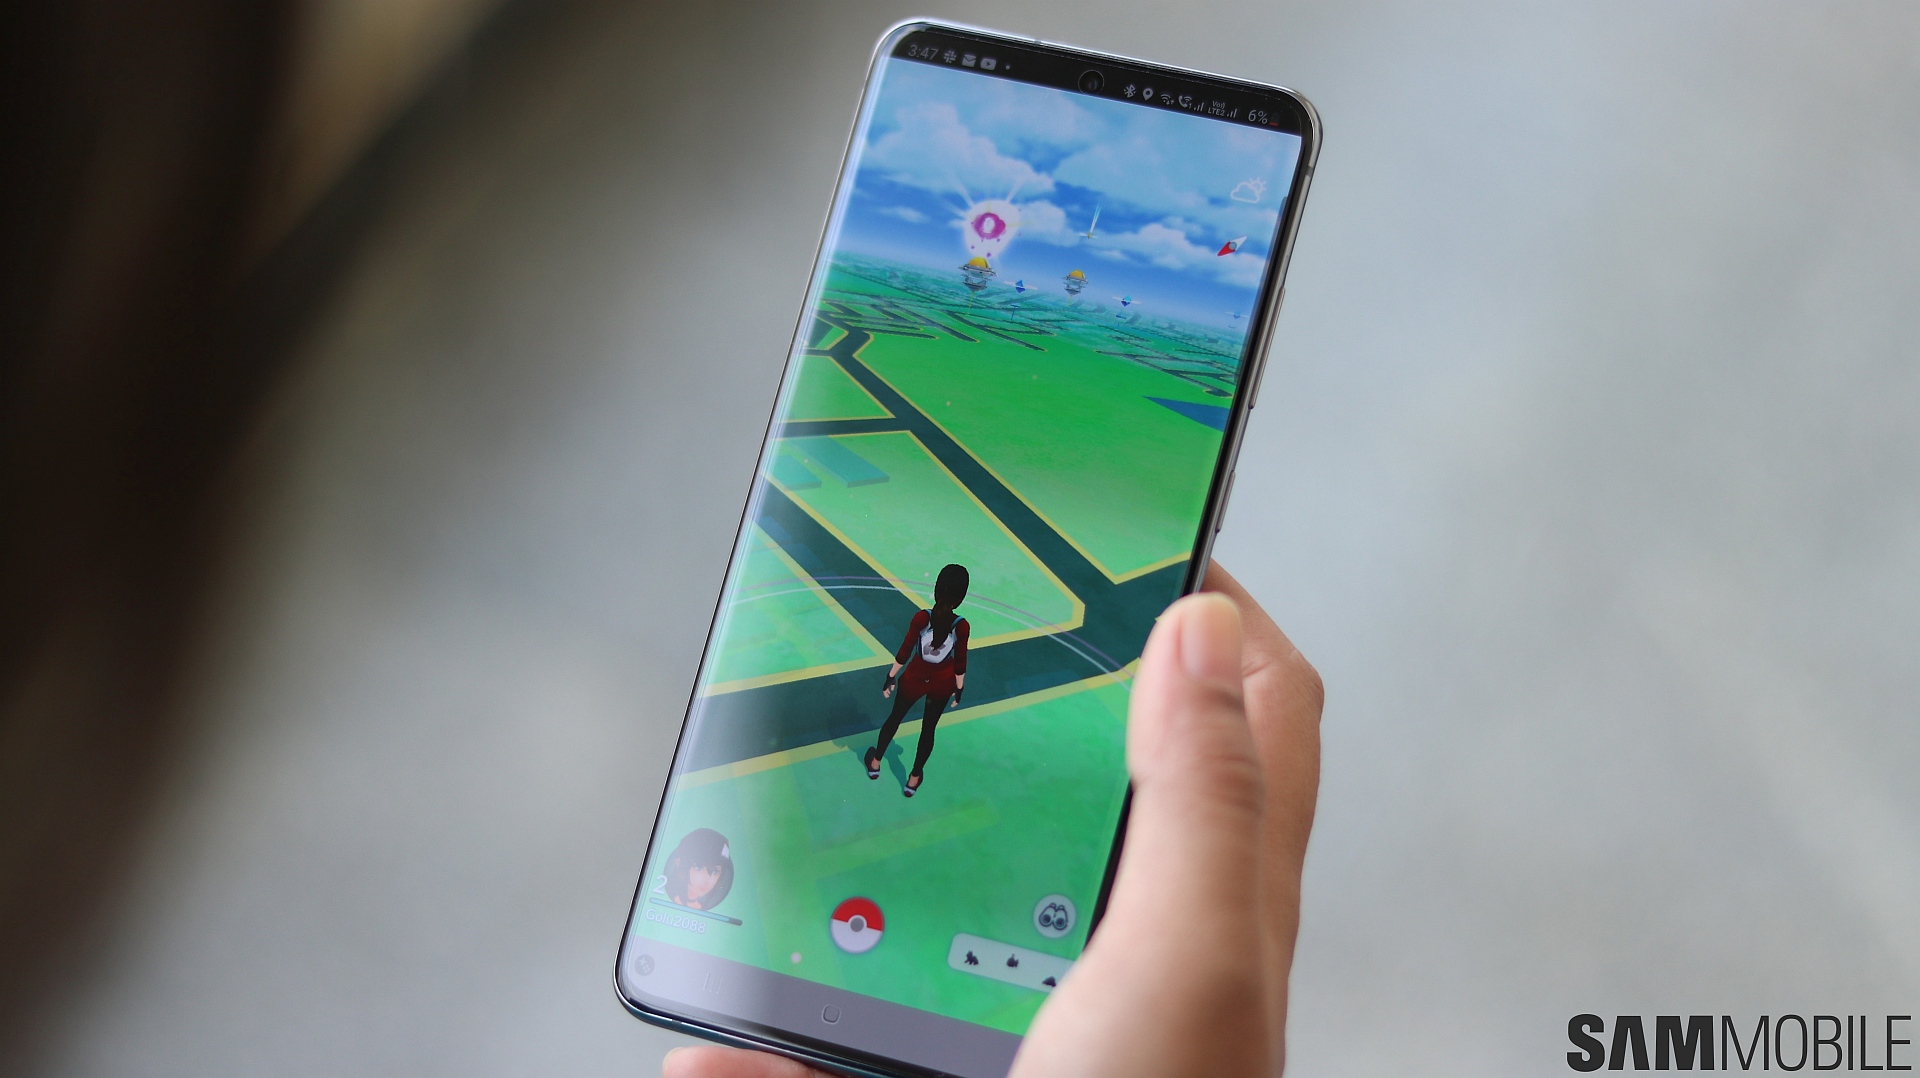 Samsung Gives Away 5 Worth Of Pokemon Go Consumables For Free